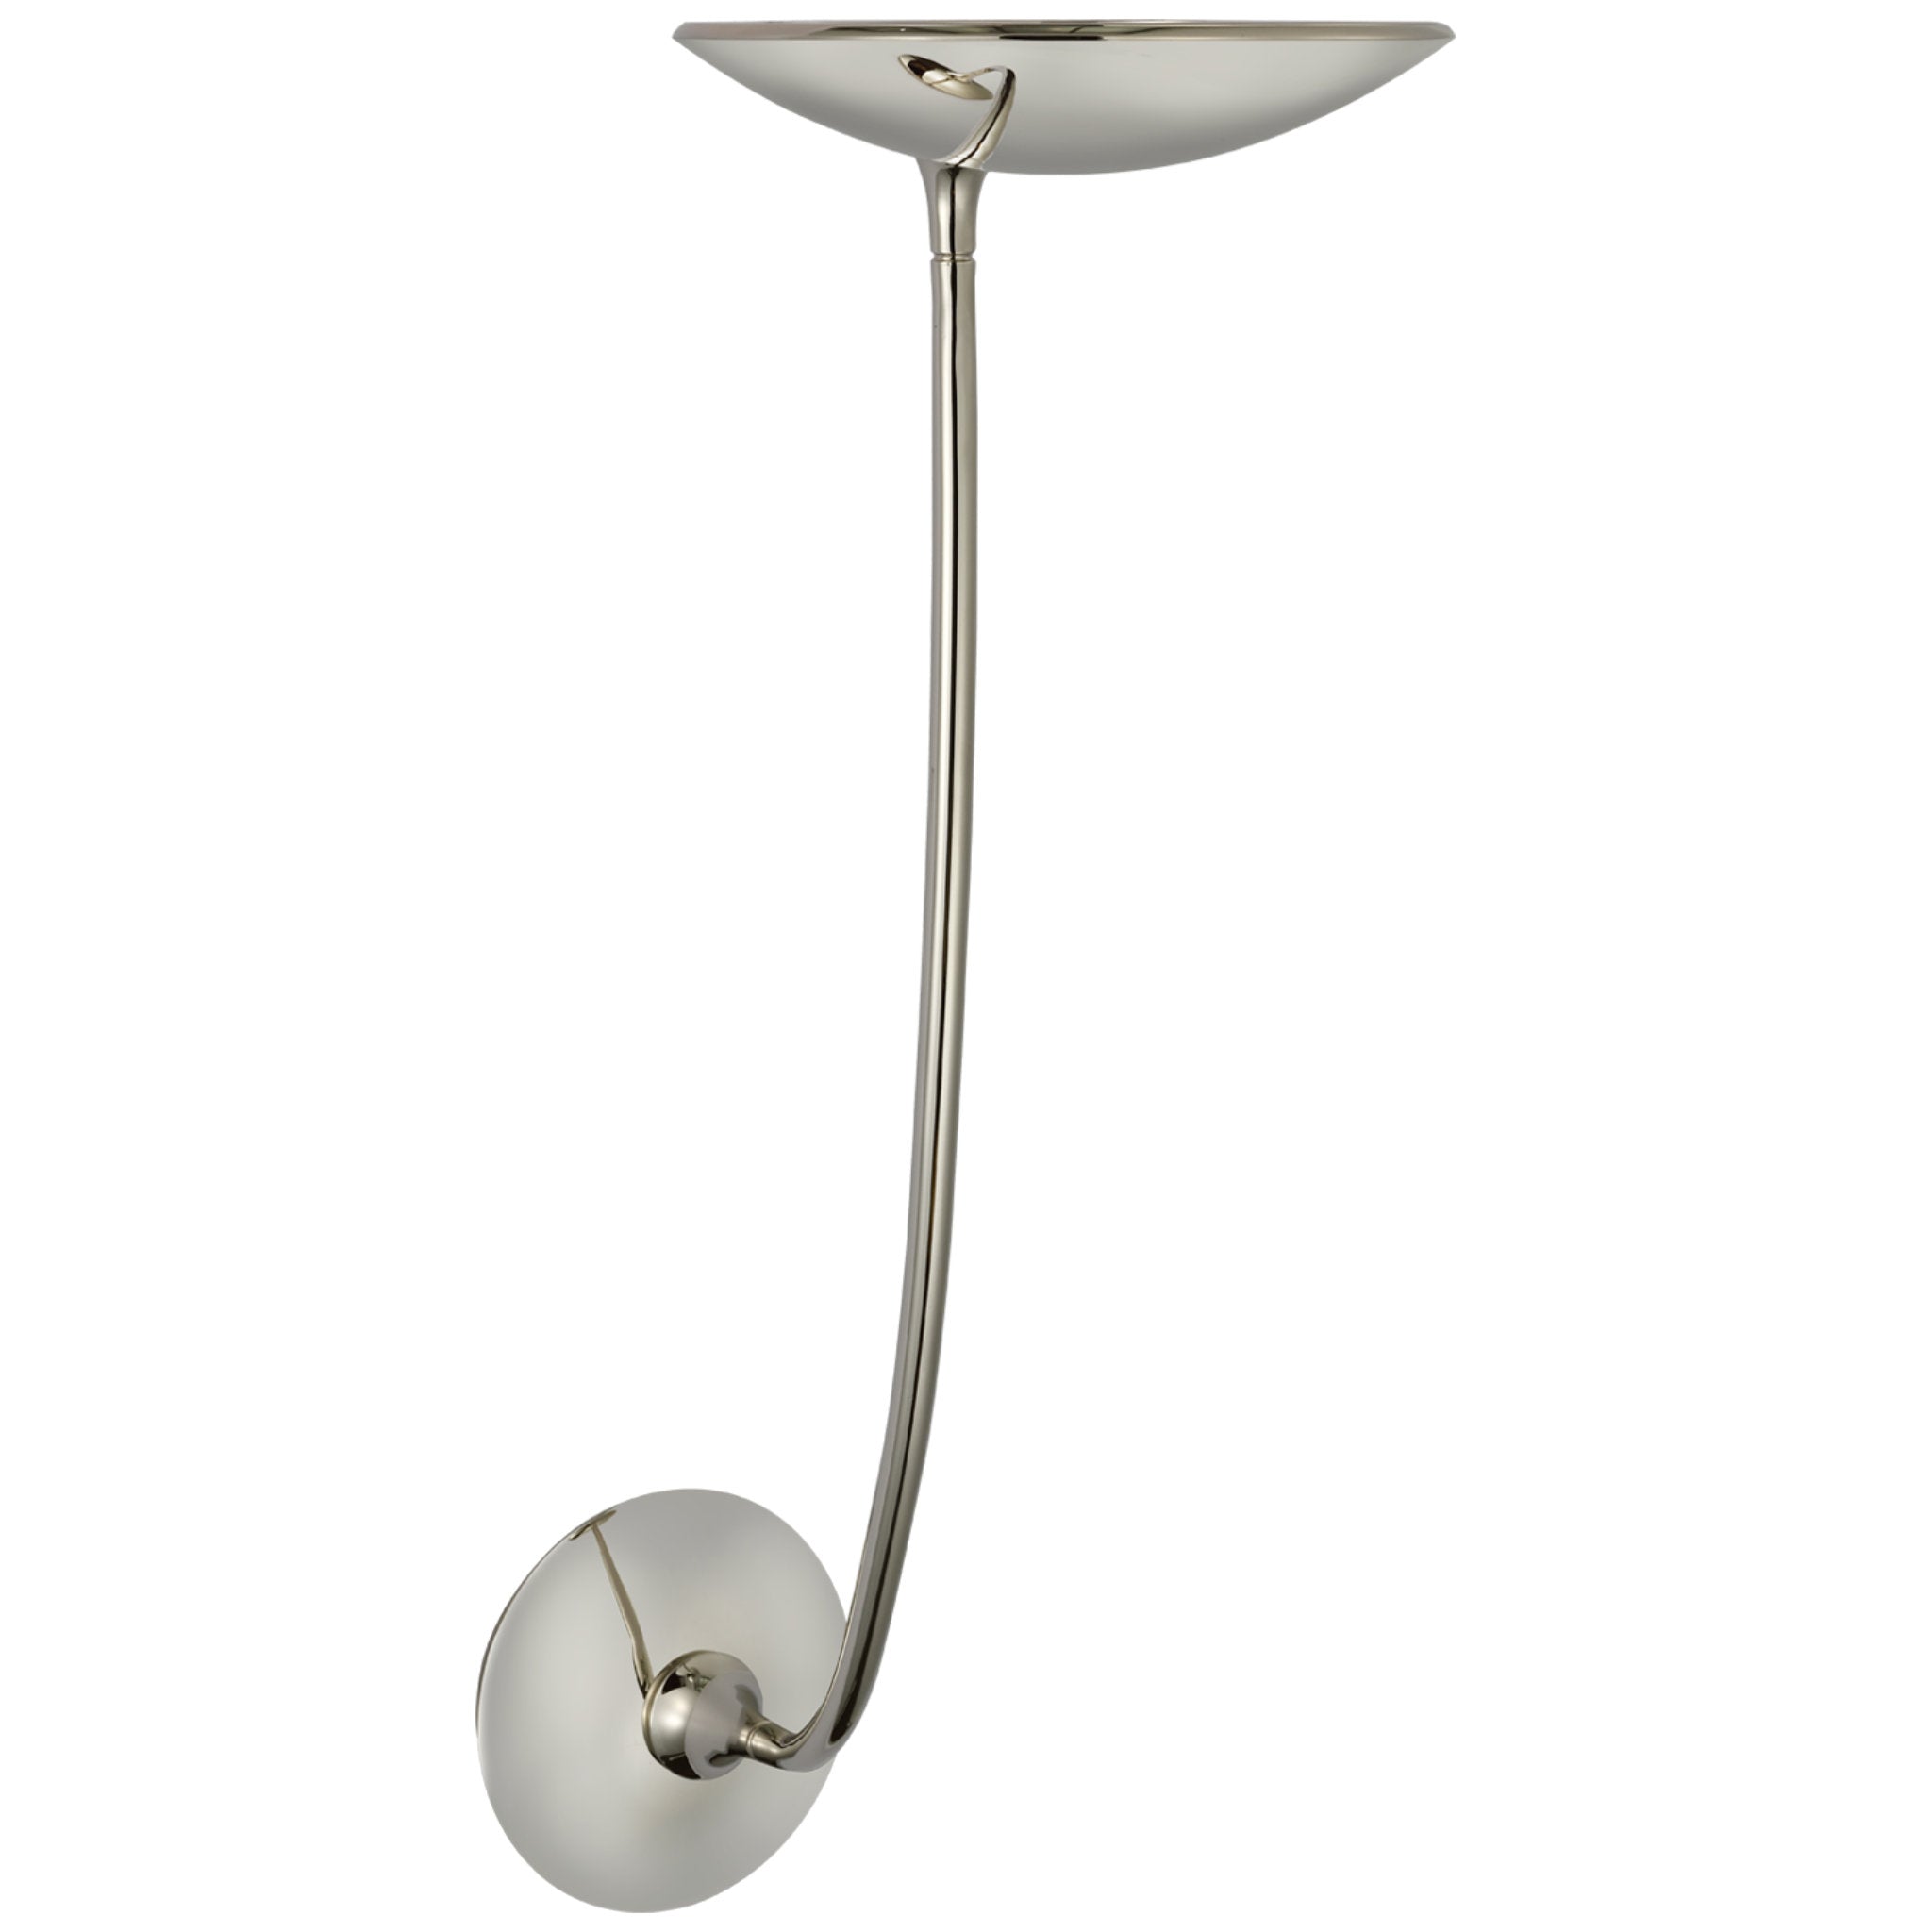 Thomas O'Brien Keira Large Sconce in Polished Nickel